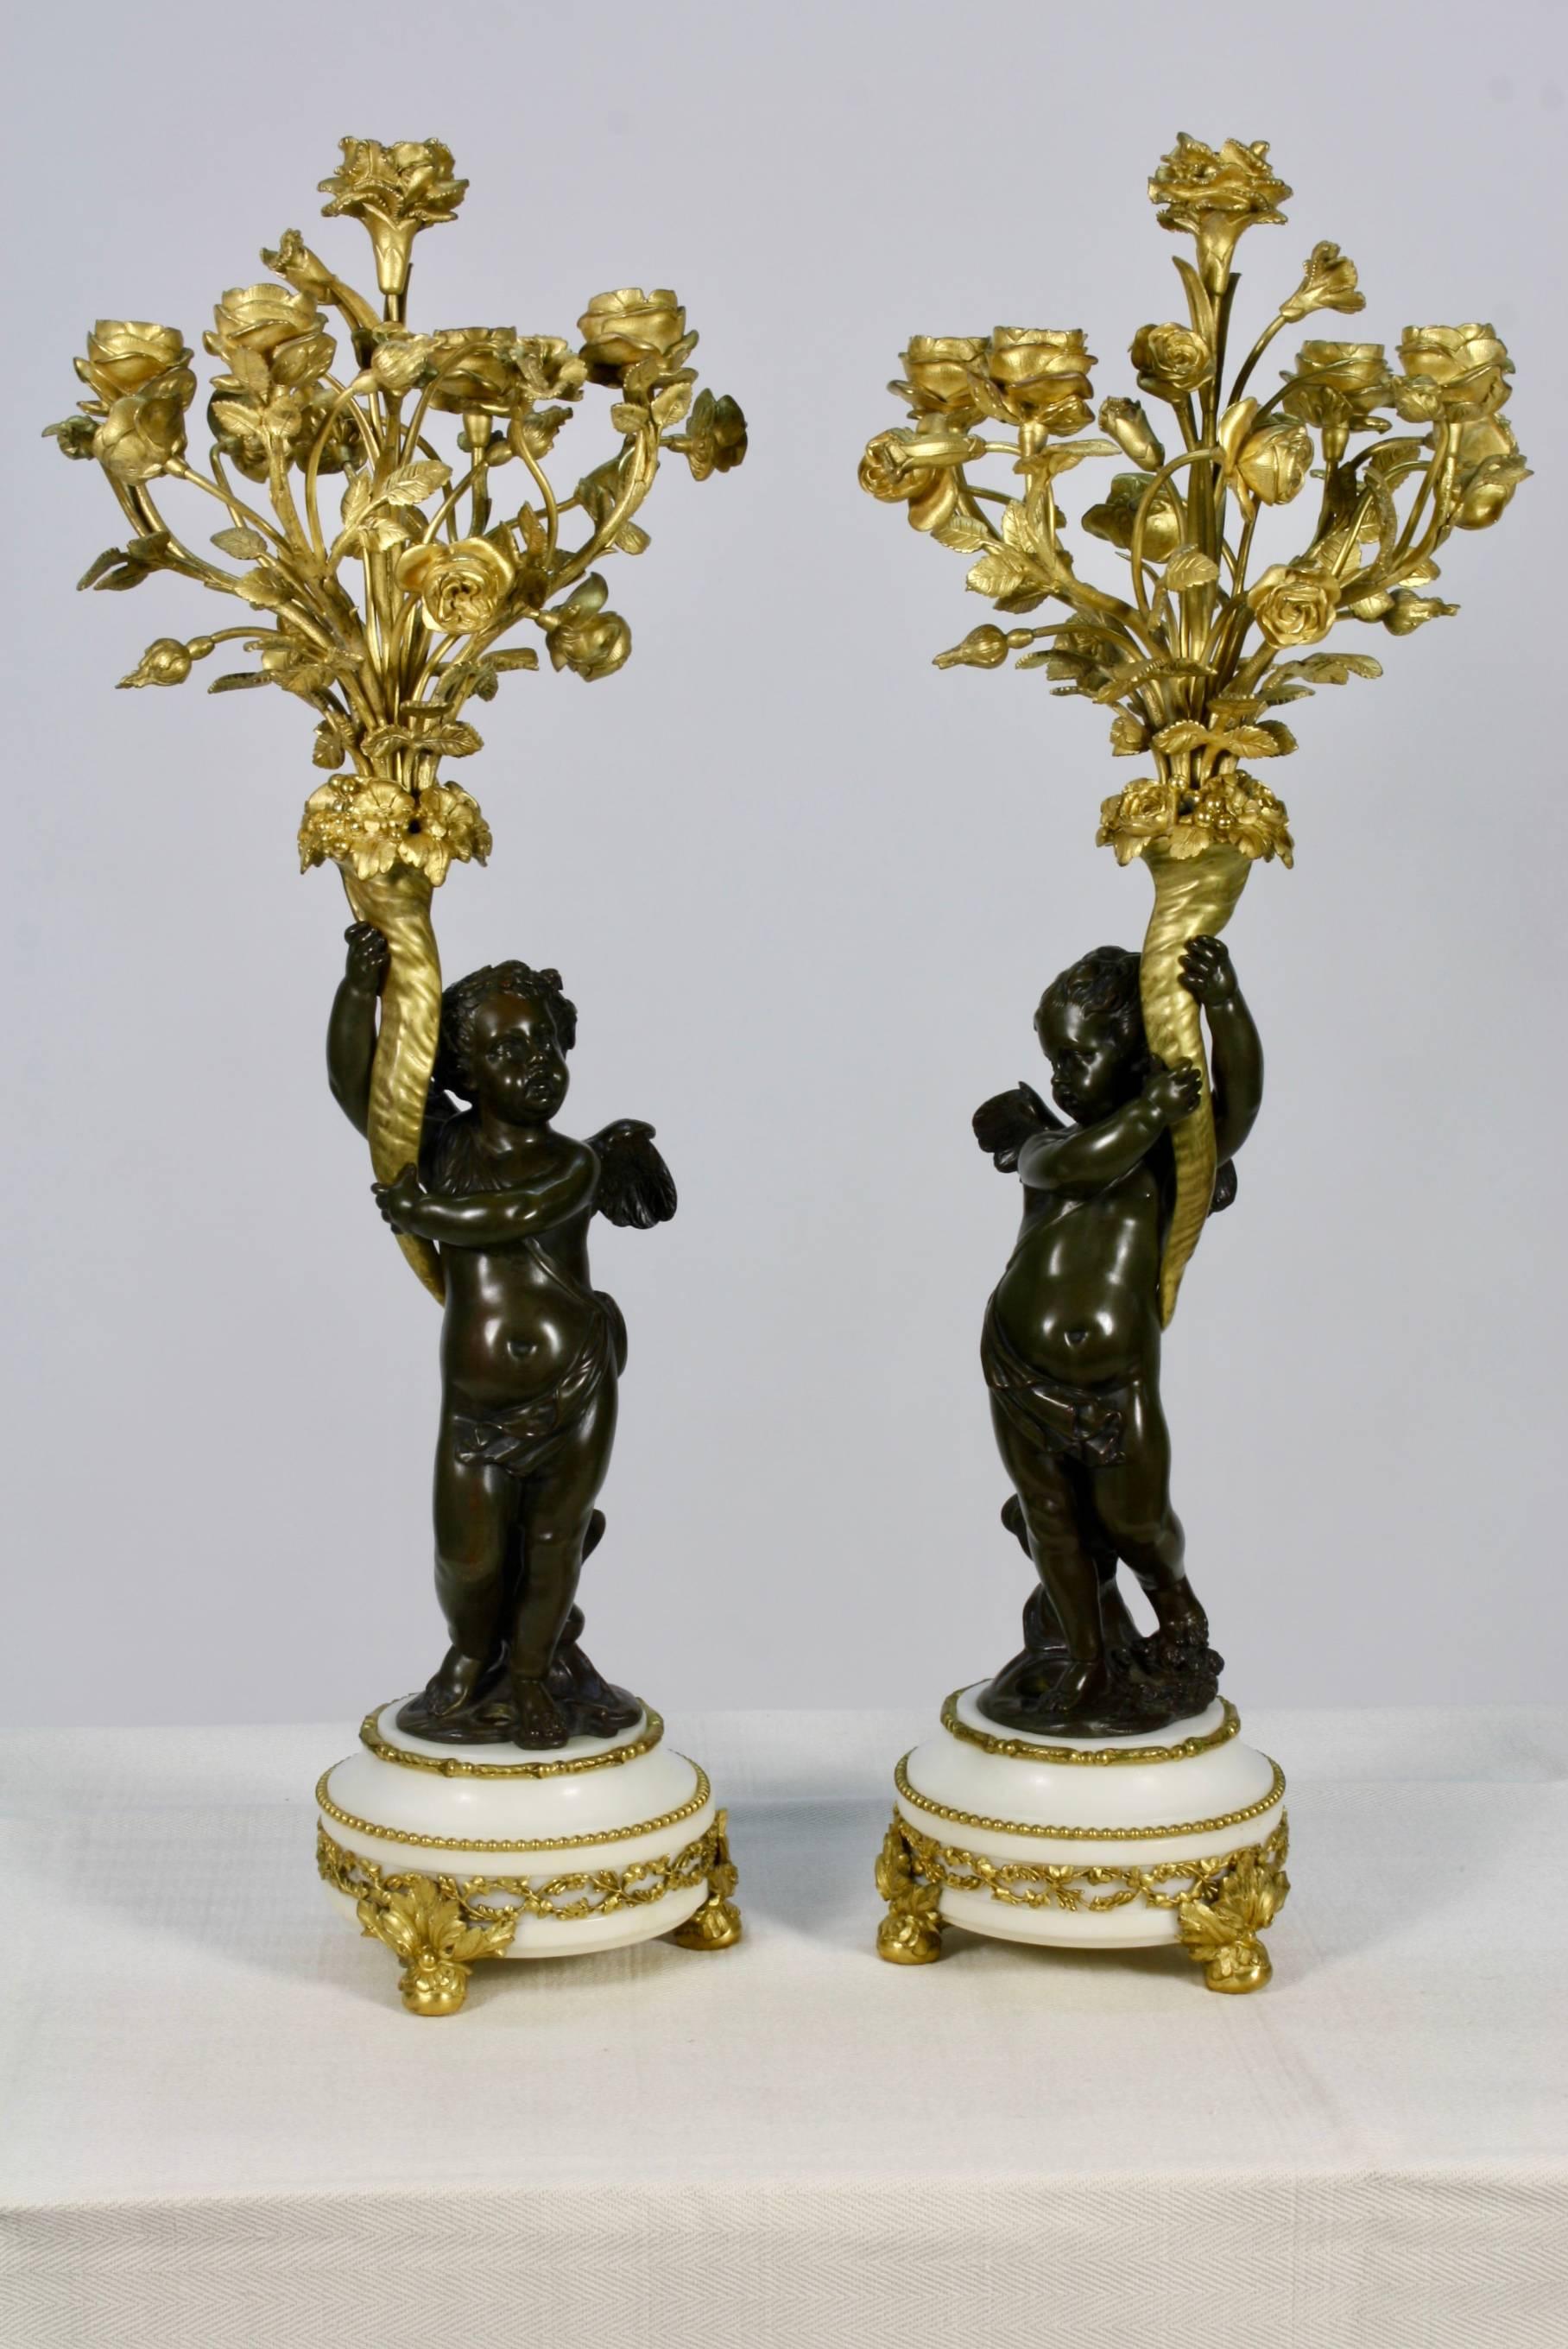 Pair of candelabra with winged putti, each supporting a floral bouquet, on top of marble base. Each putti is patinated bronze and the bouquets are gilt bronze. The floral bouquet has five candle cups. The candle cups and bases have been drilled for